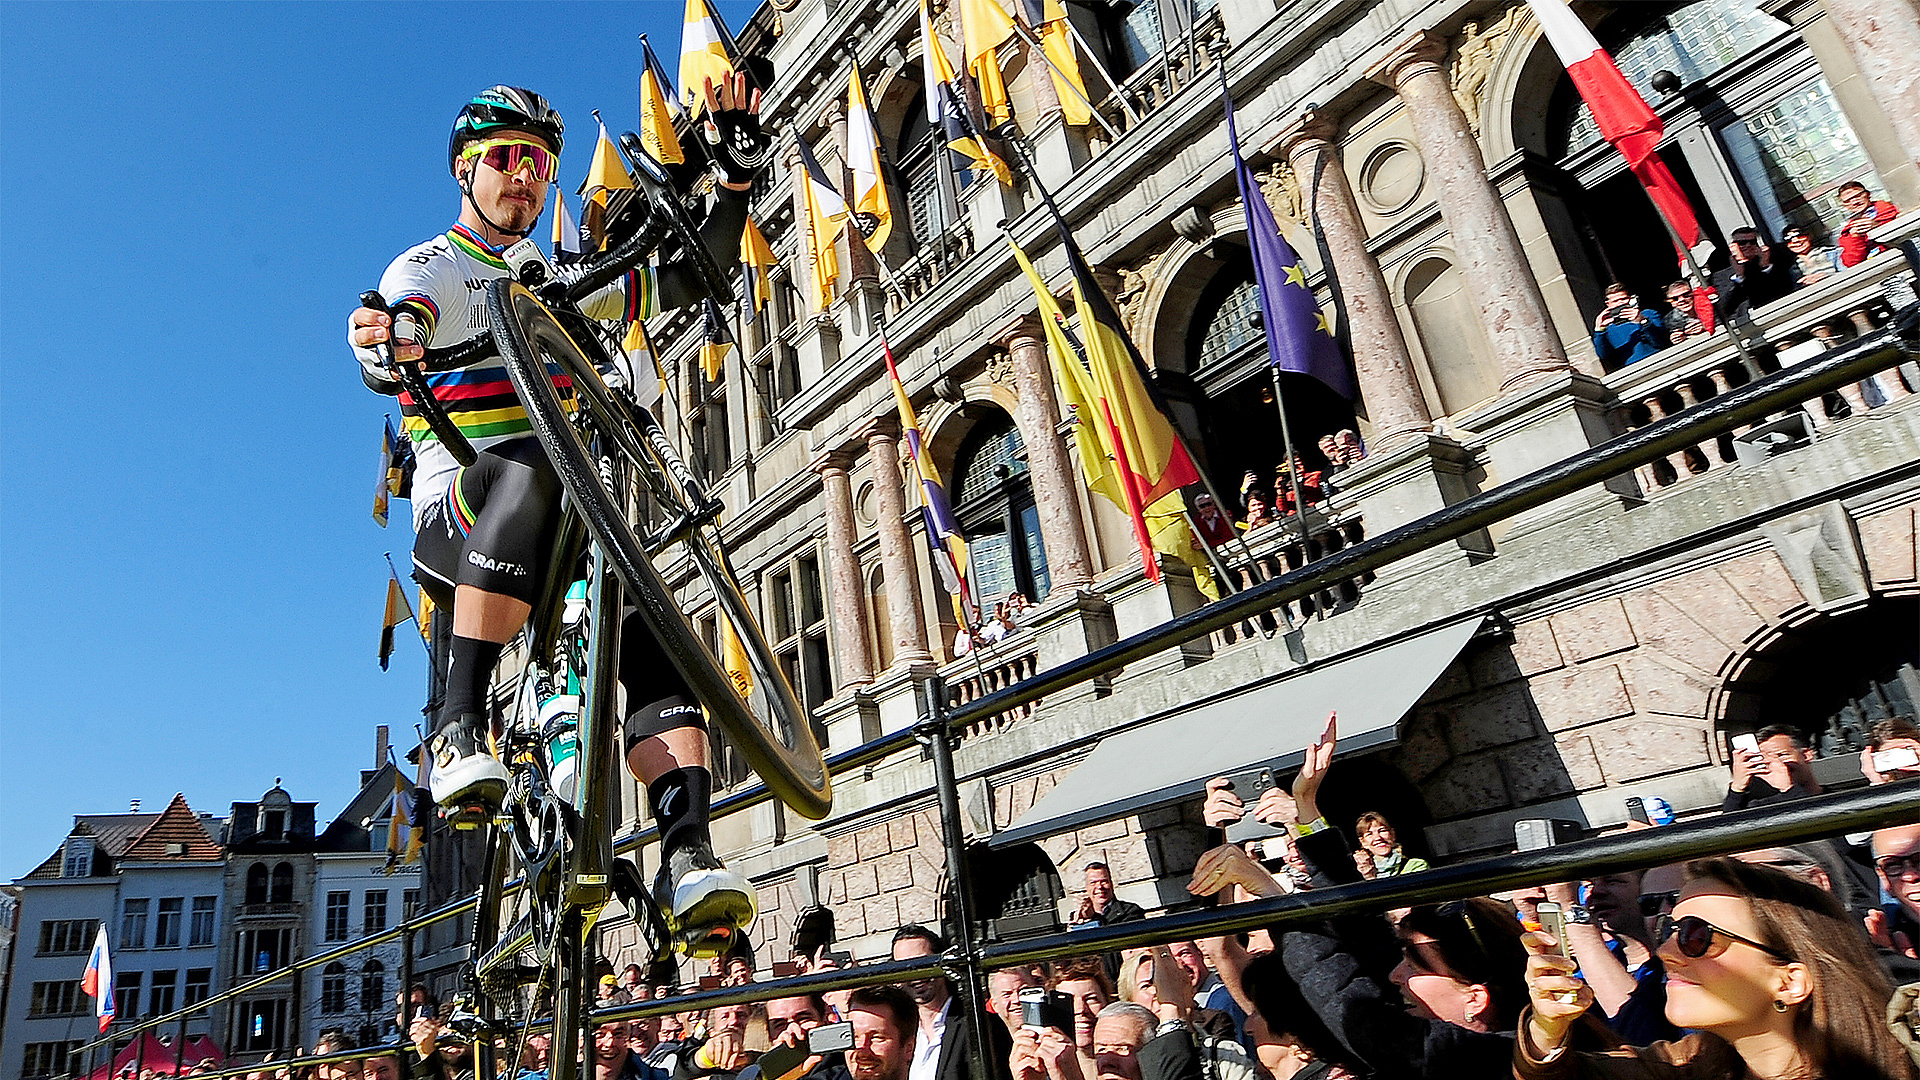 Peter Sagan – the unconventional cycling legend